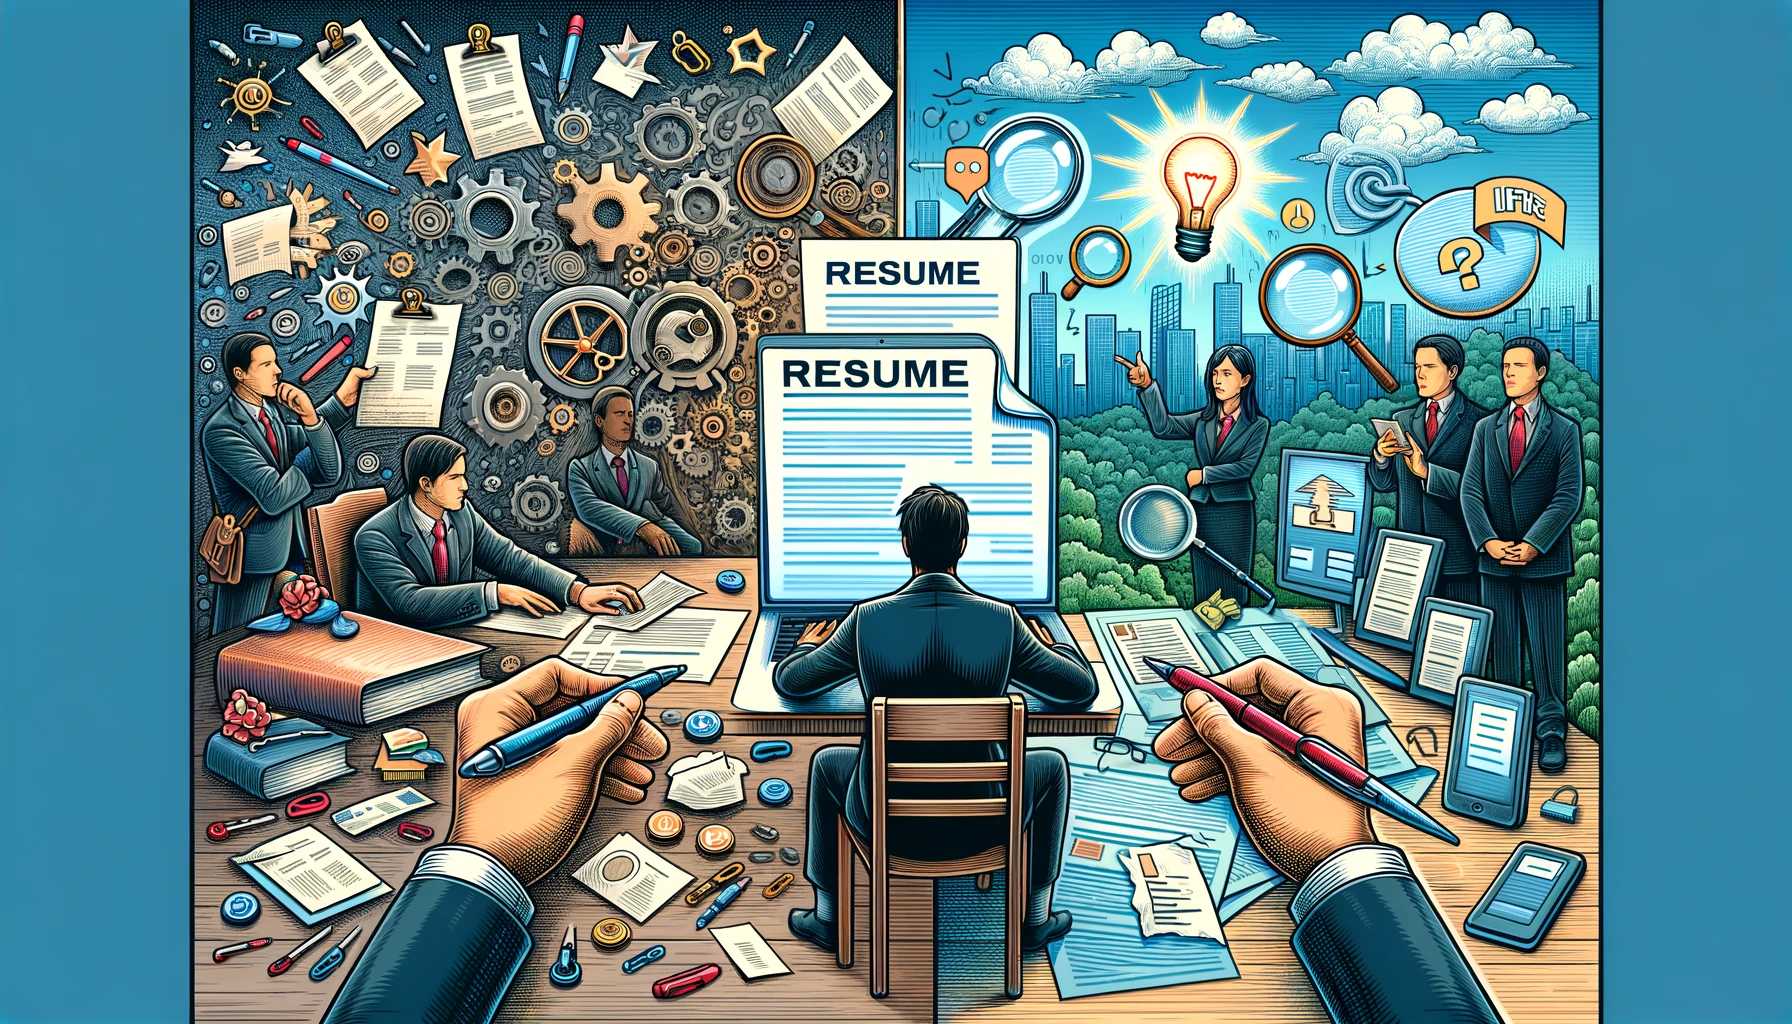 Analyzing the Role of Resume Writing Services and Professional Consultants